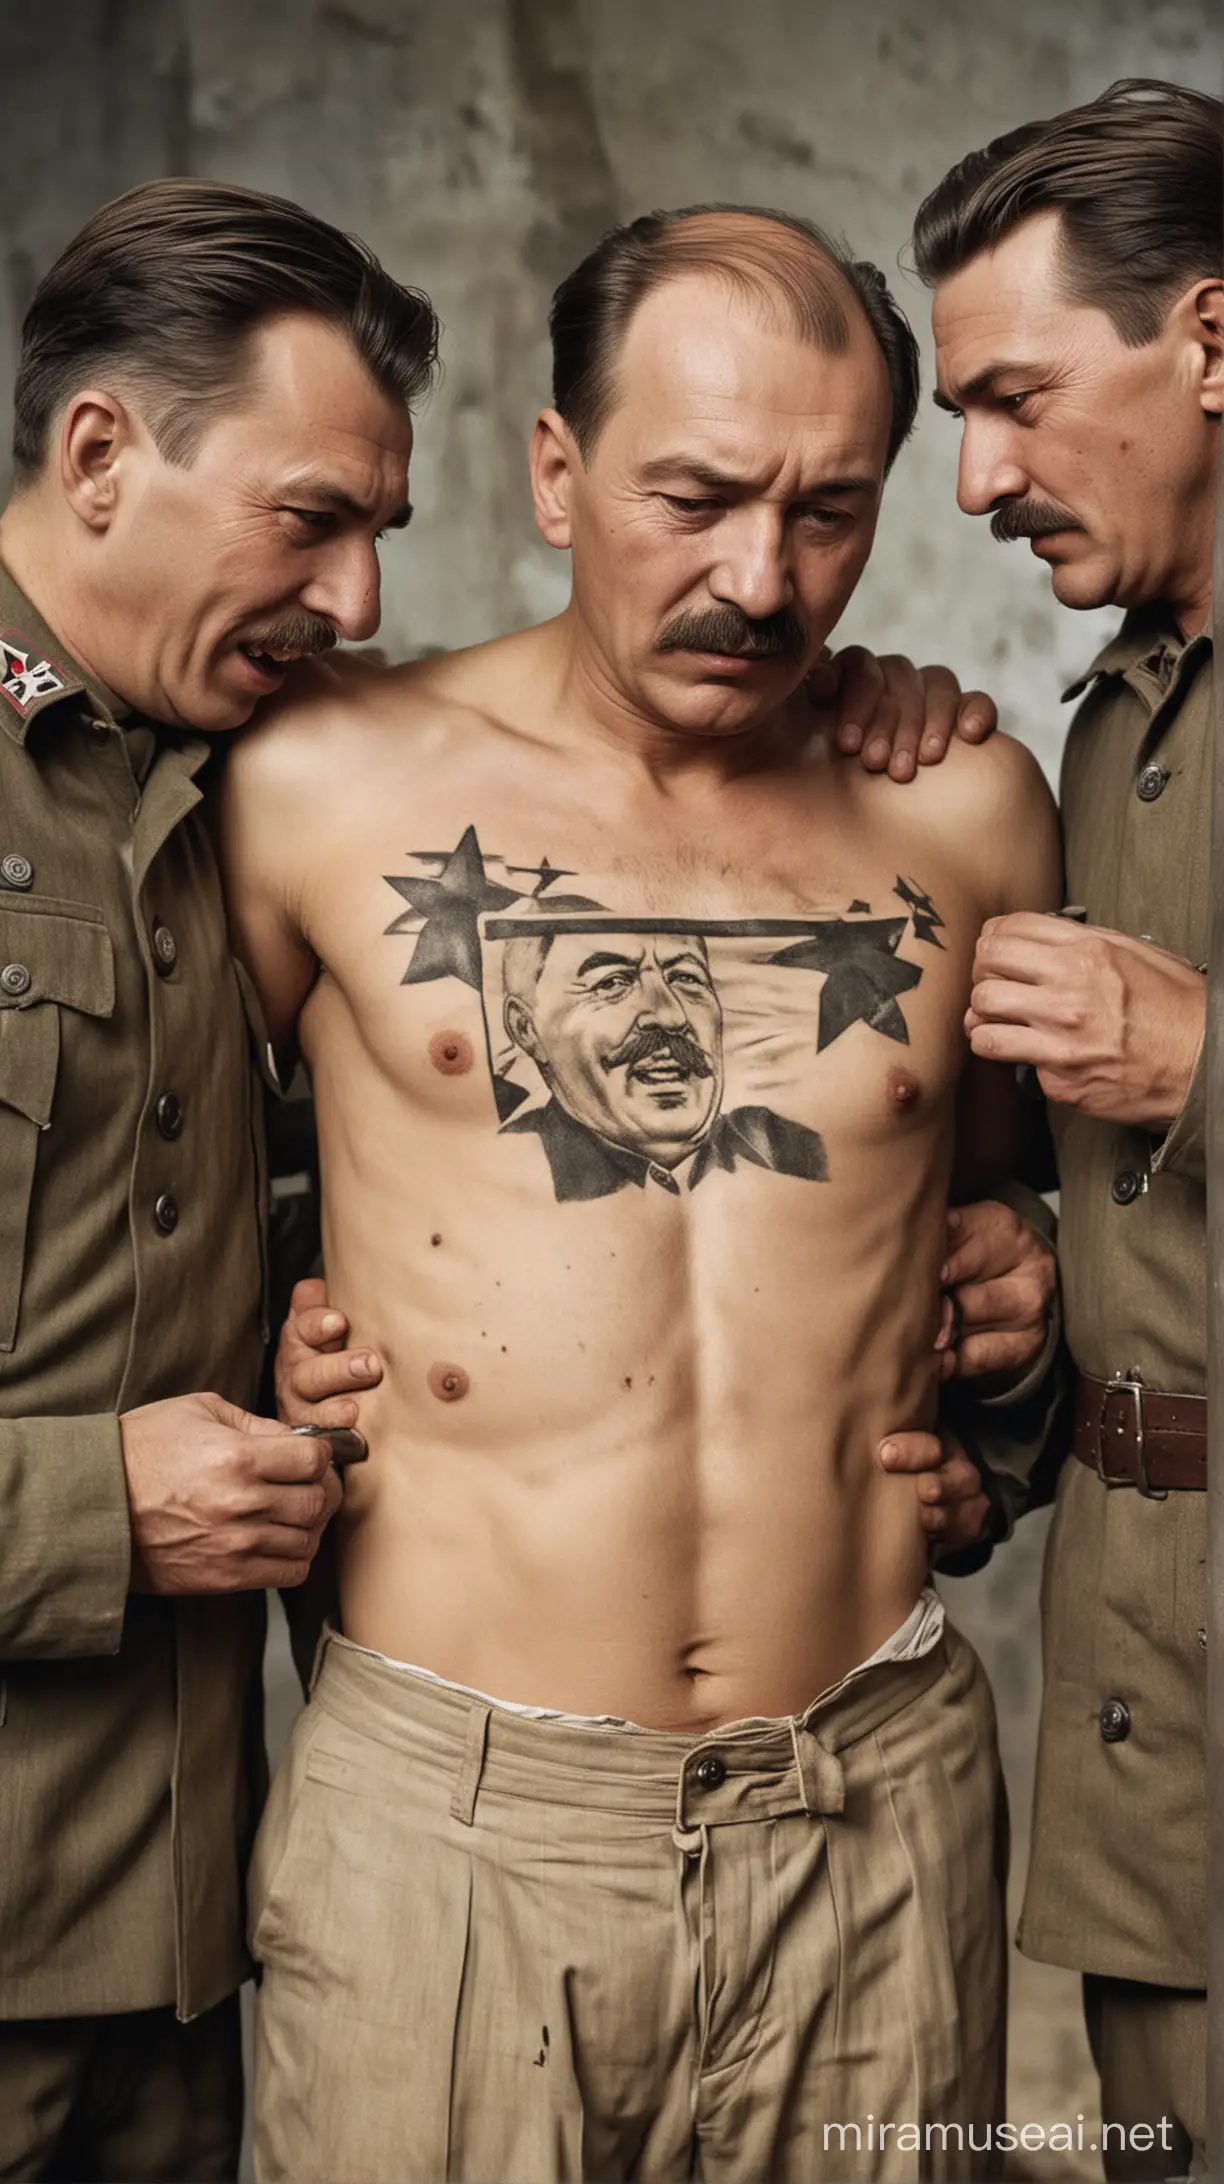 Nazi soldiers tear open a prisoner's shirt to reveal a tattoo of Lenin and Stalin on his chest while they are checking him. The soldiers look puzzled and worried as the tattoo gives them pause before shooting the prisoner.